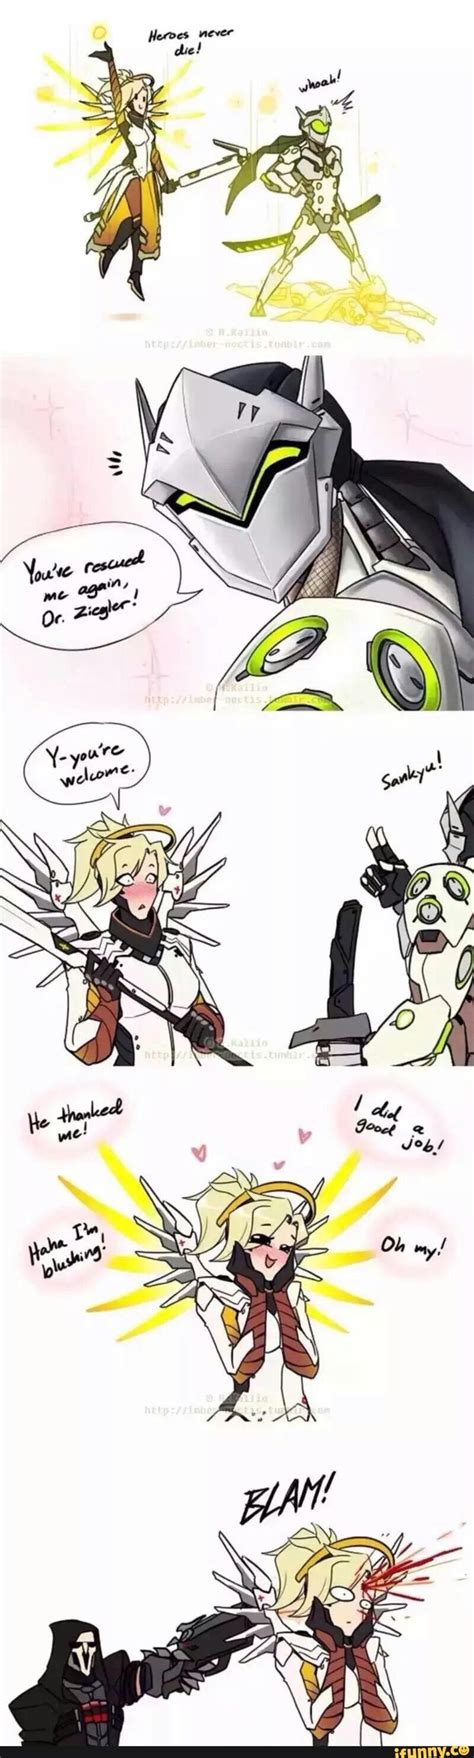 This Is Hilarious Overwatch Funny Overwatch Overwatch Memes